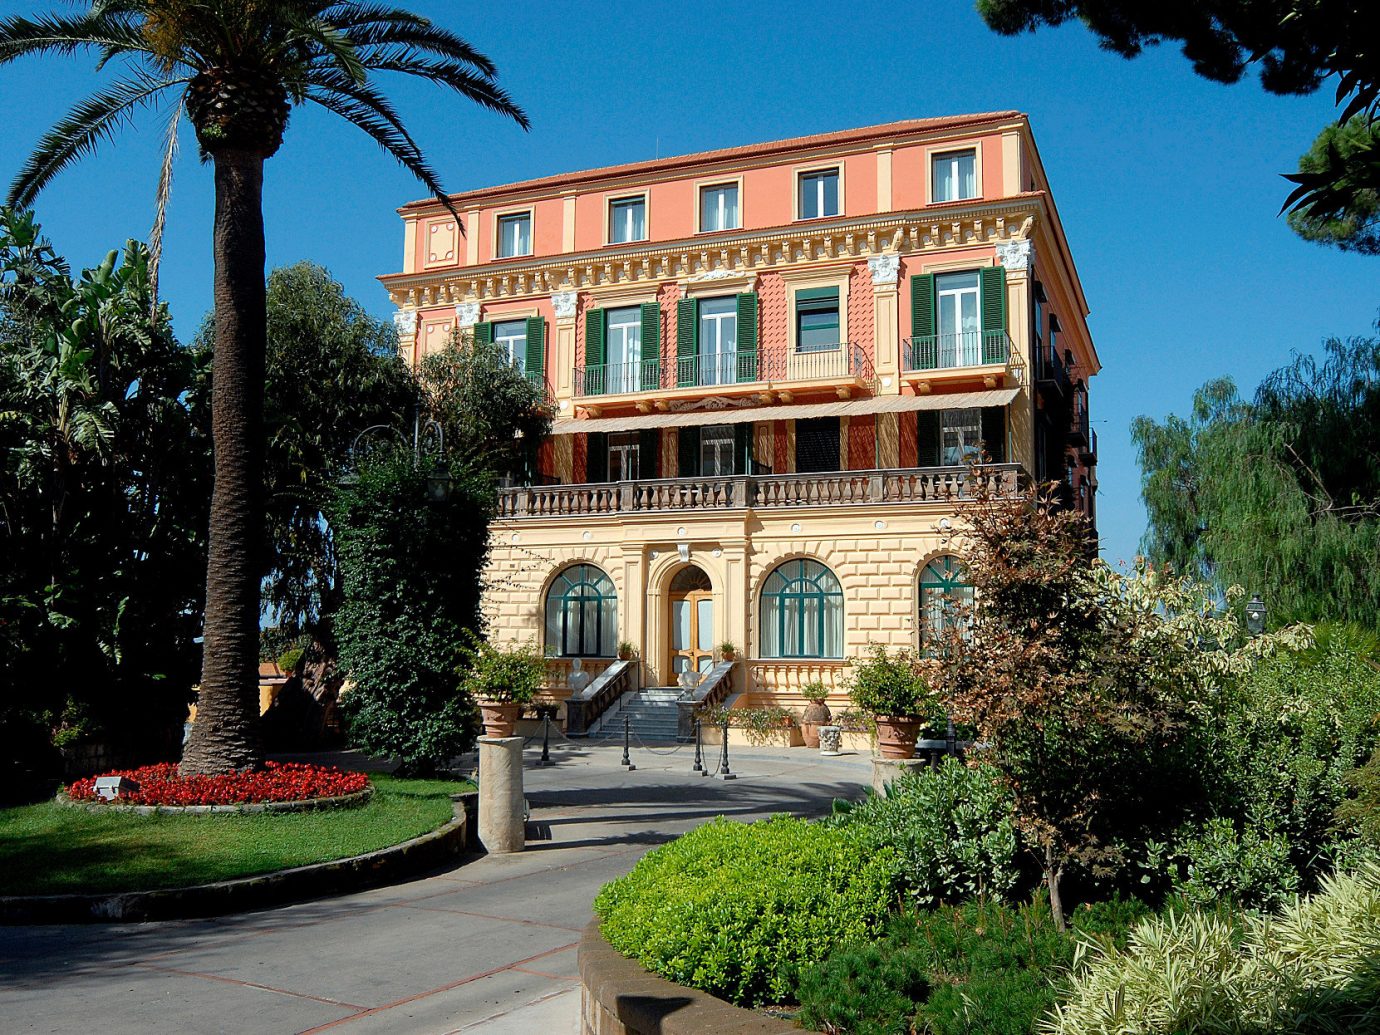 Exterior view of Grand Hotel Excelsior Vittoria Sorrento, Italy